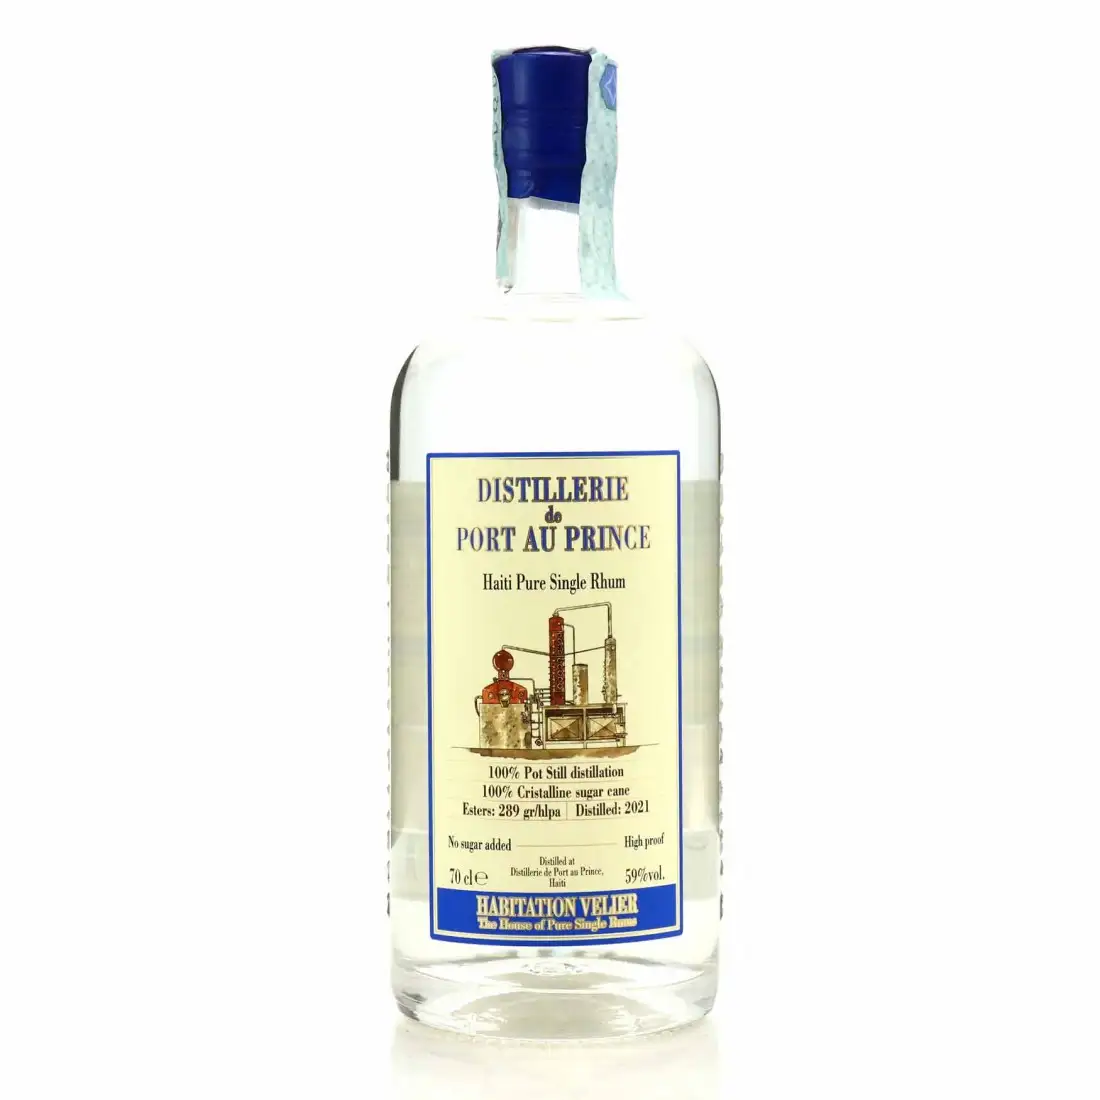 Image of the front of the bottle of the rum Haiti Pure Single Rum